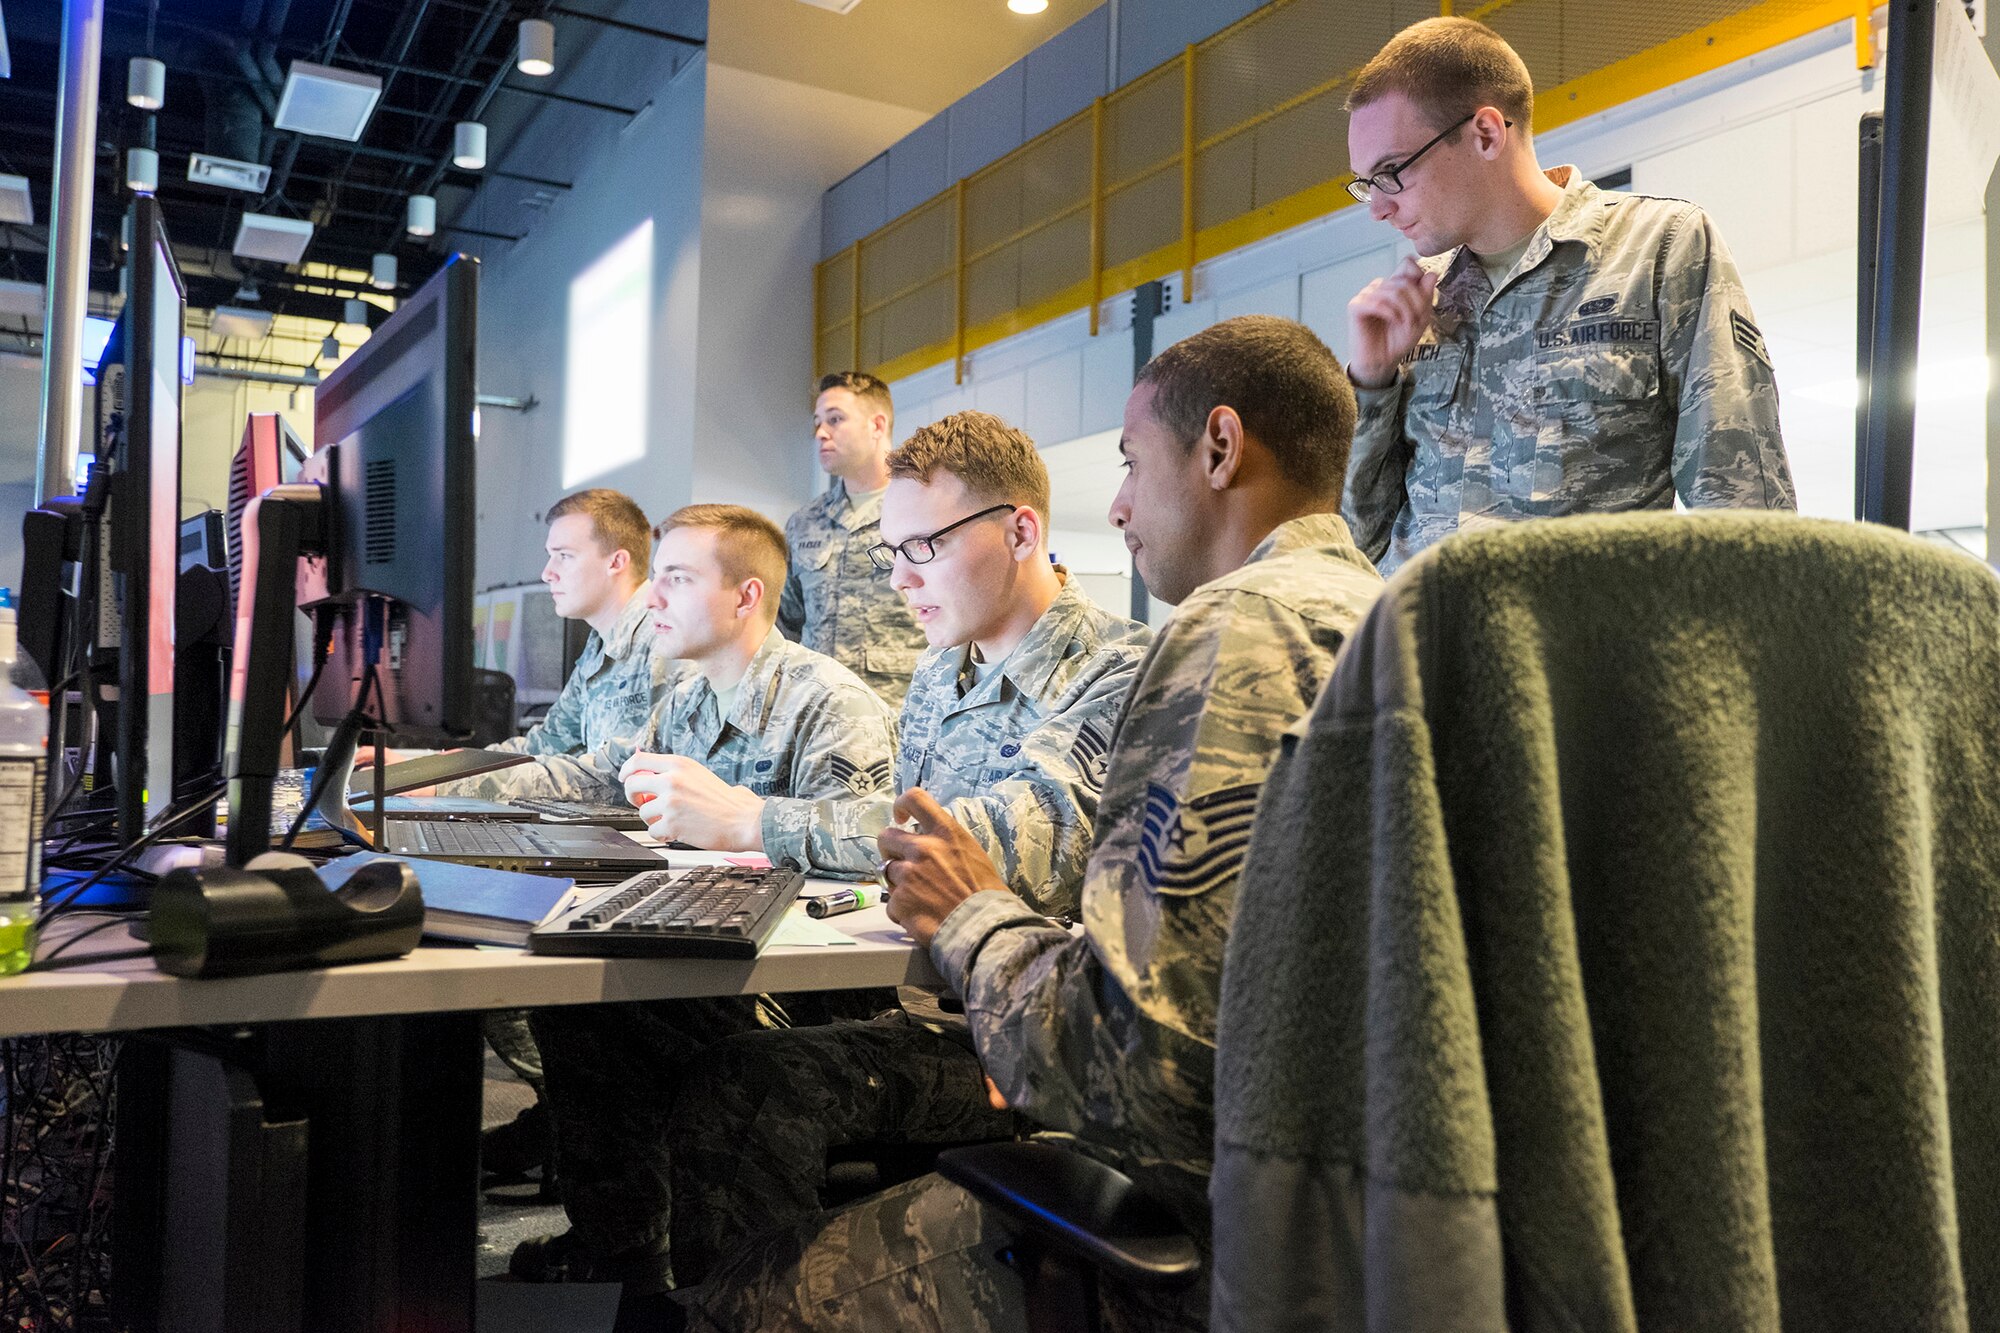 Members of a Cyber Mission Defense Team from Scott participate in the annual Red Flag exercise at Nellis Air Force Base, Nevada. The exercise helps build the skills necessary to defend an Air Operations Center.